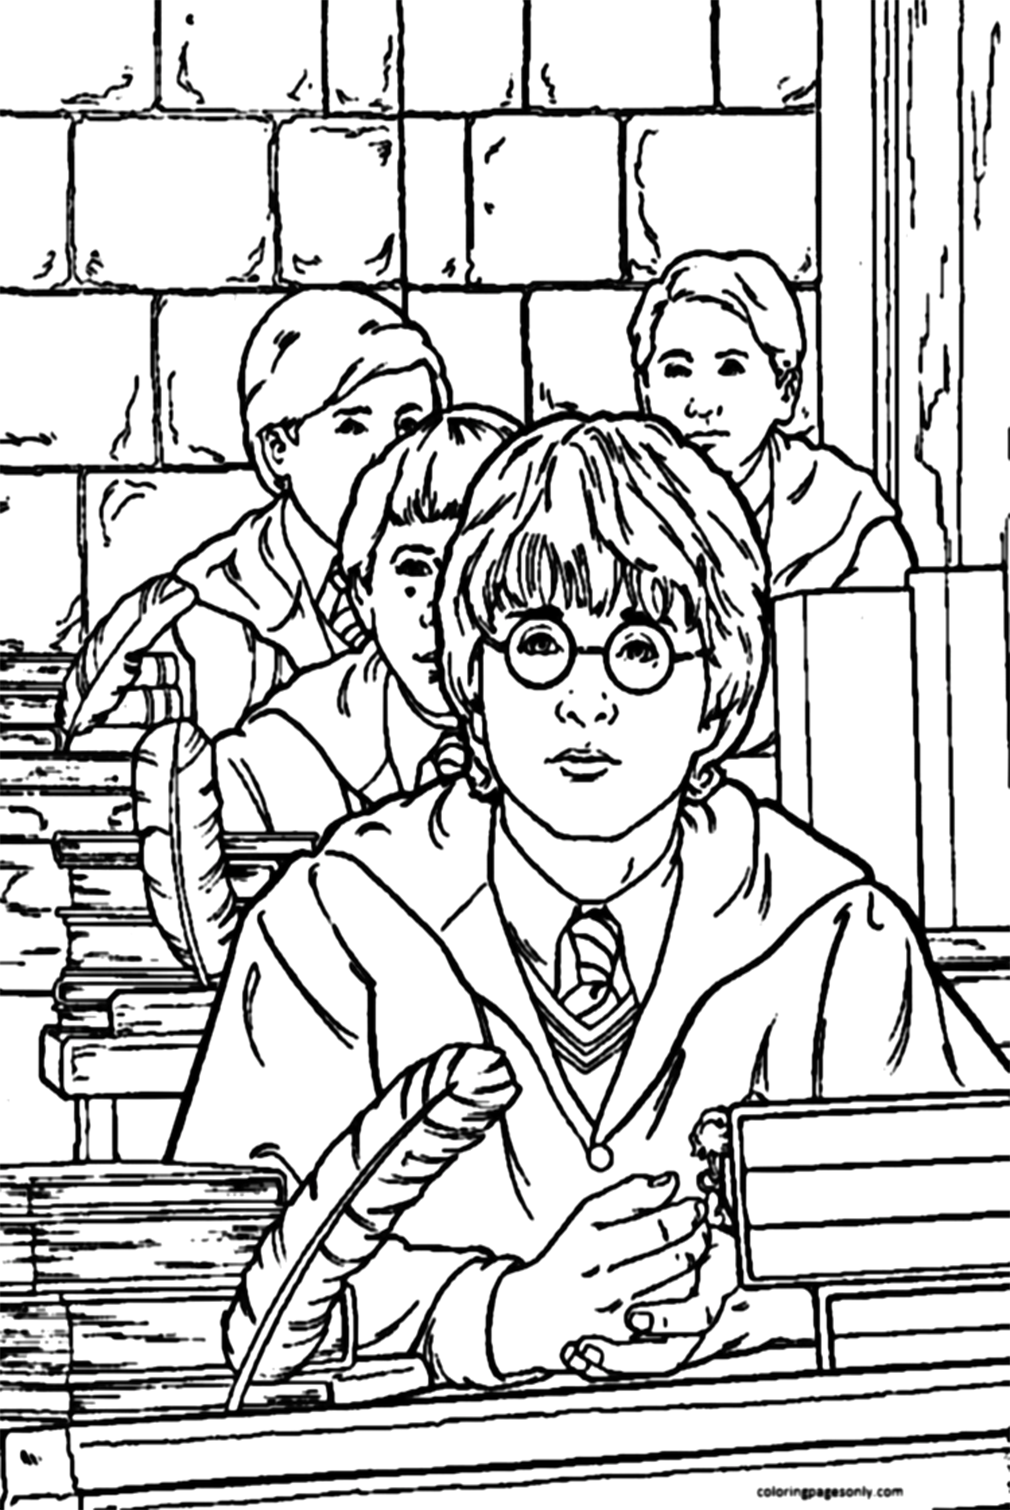 Harry Poter Coloring Sheet Coloring Pages